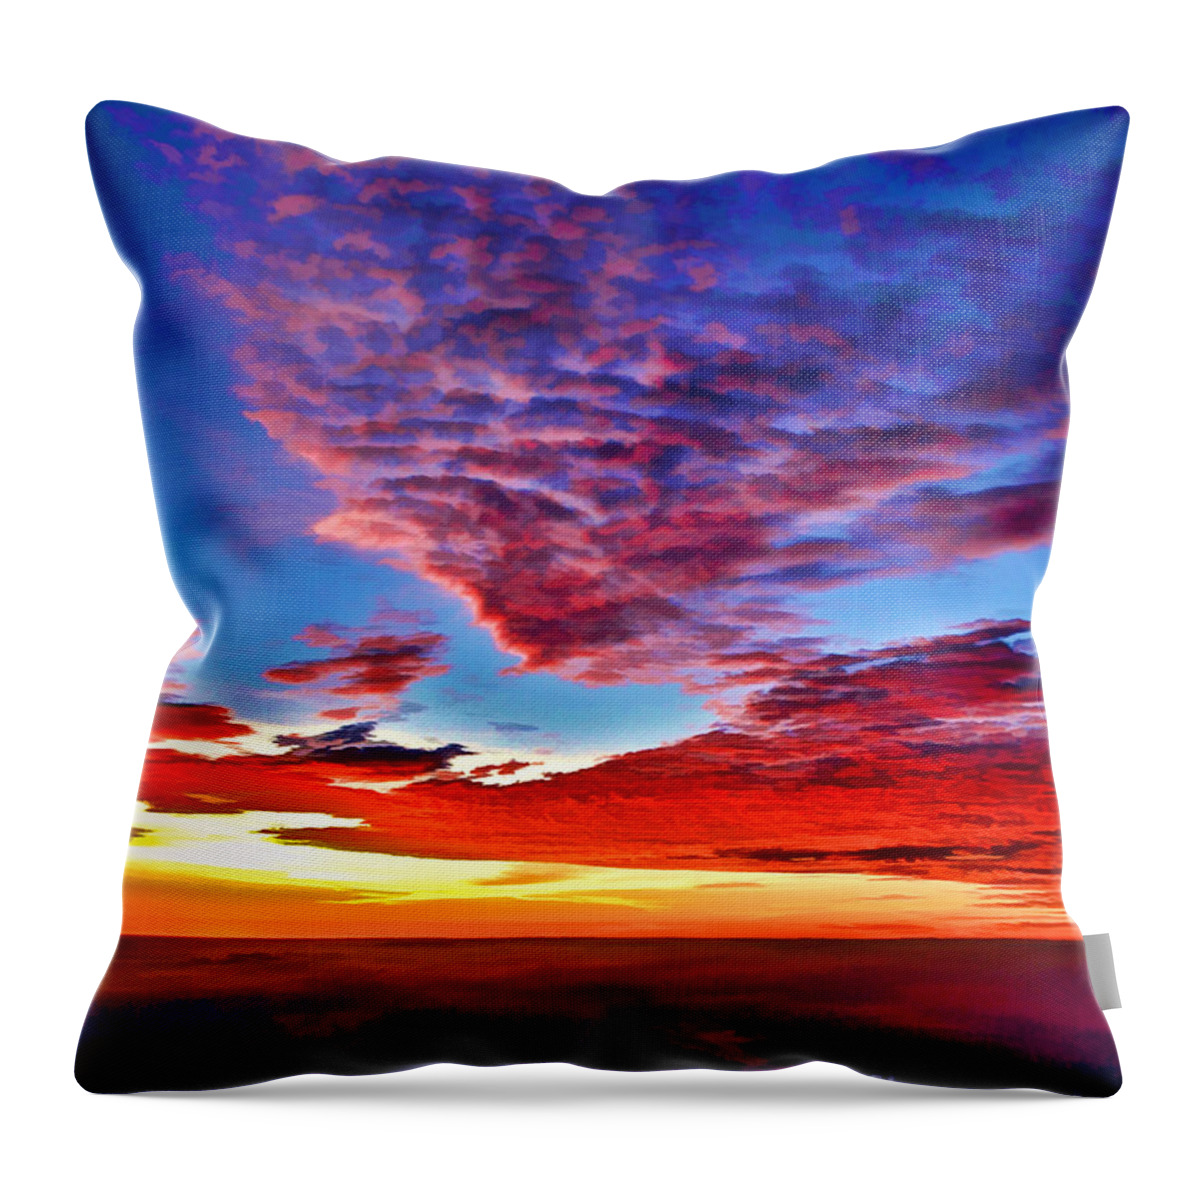 Painted Heavens Throw Pillow featuring the photograph Painted Heavens by Adam Olsen